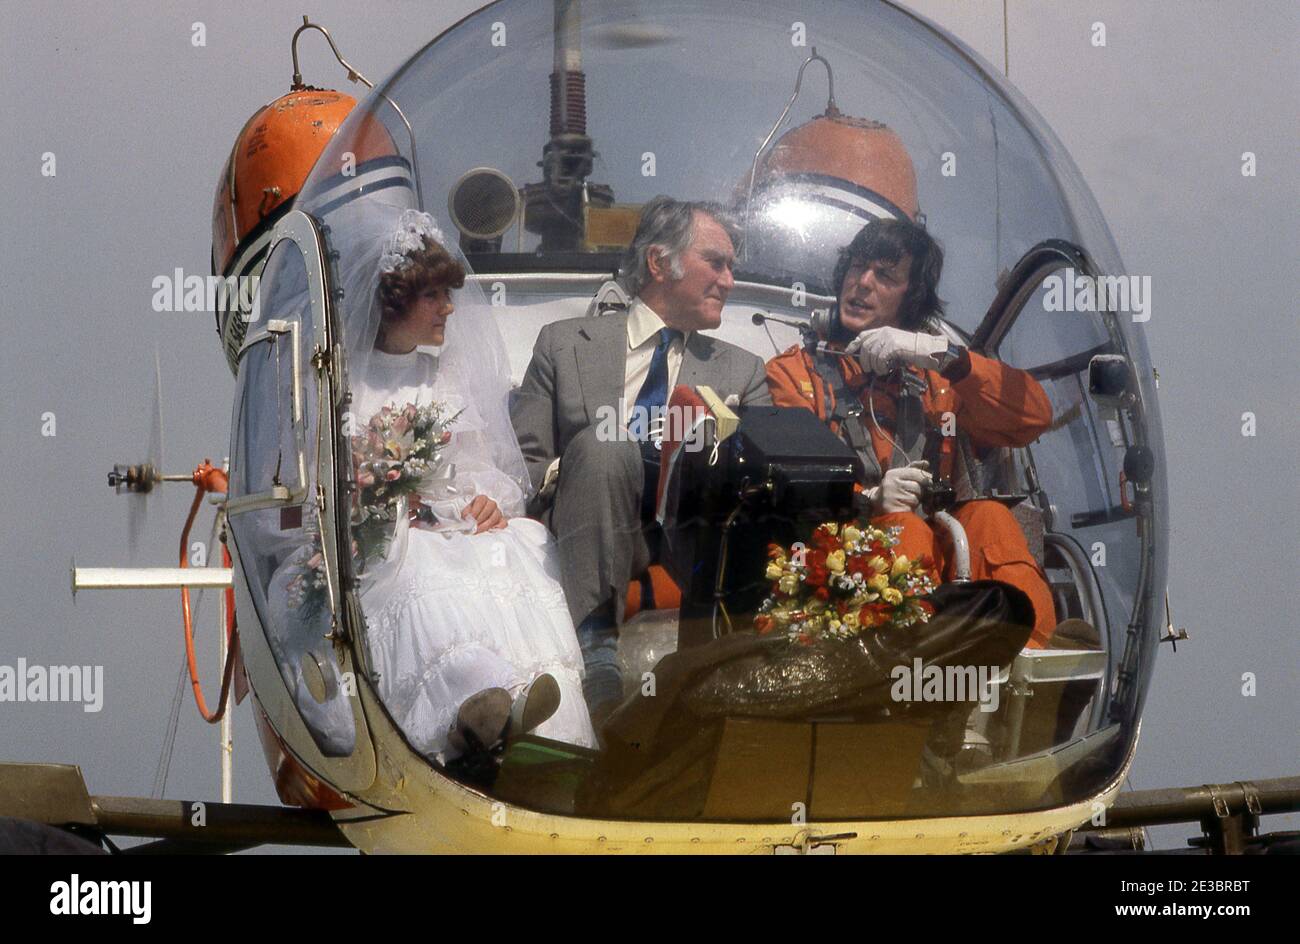 Sealand. Bride arrives by Bell Helicpter for her marriage to Prince Michael Bates May 1979 Stock Photo